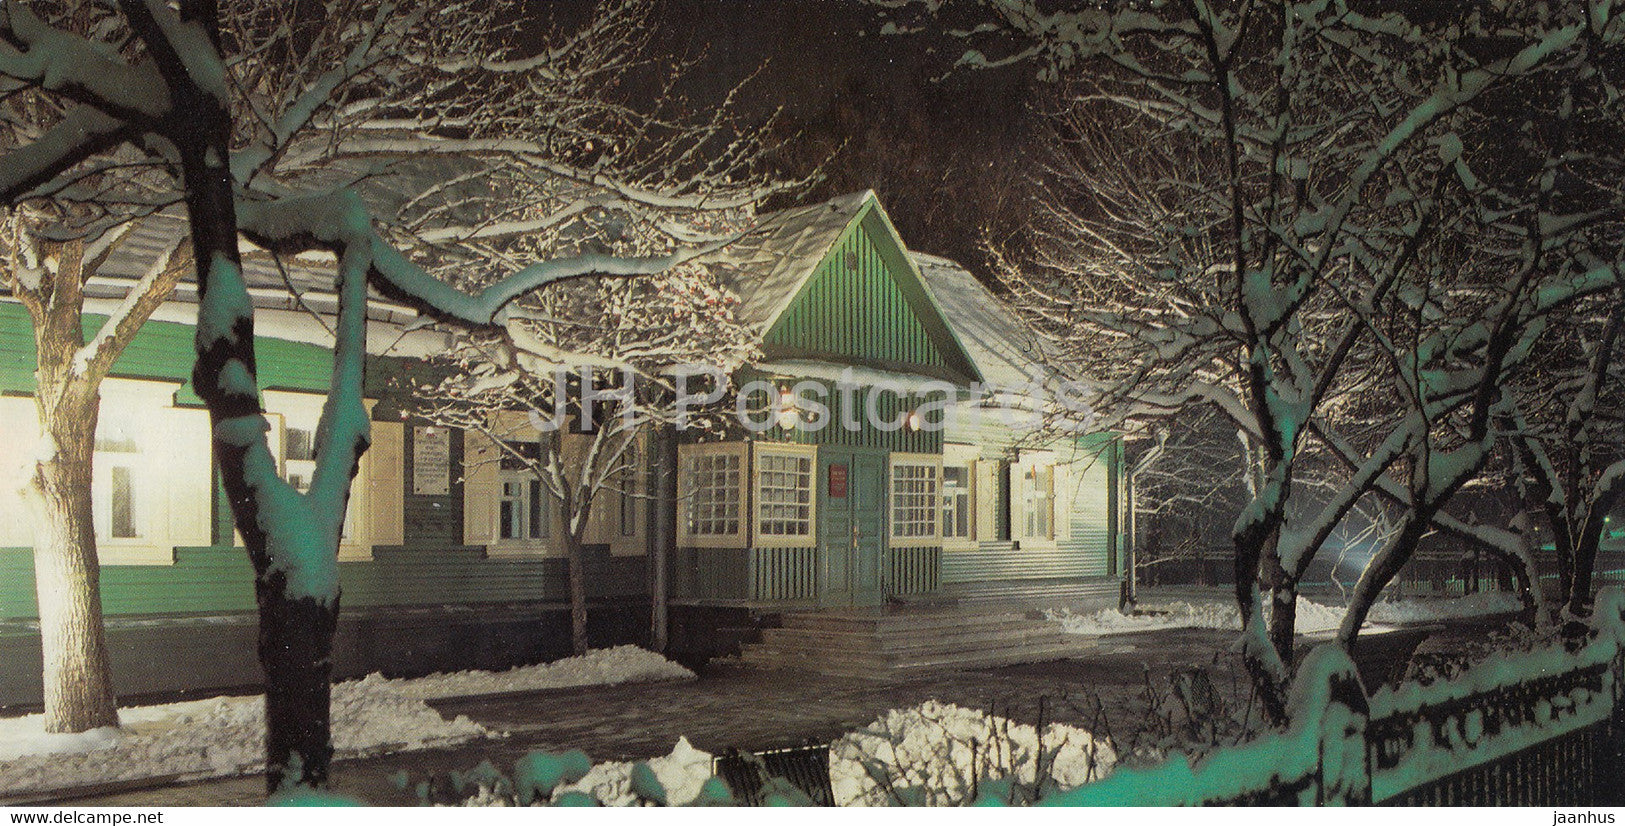 Minsk - House Museum of the 1st Party Congress - 1983 - Belarus USSR - unused - JH Postcards